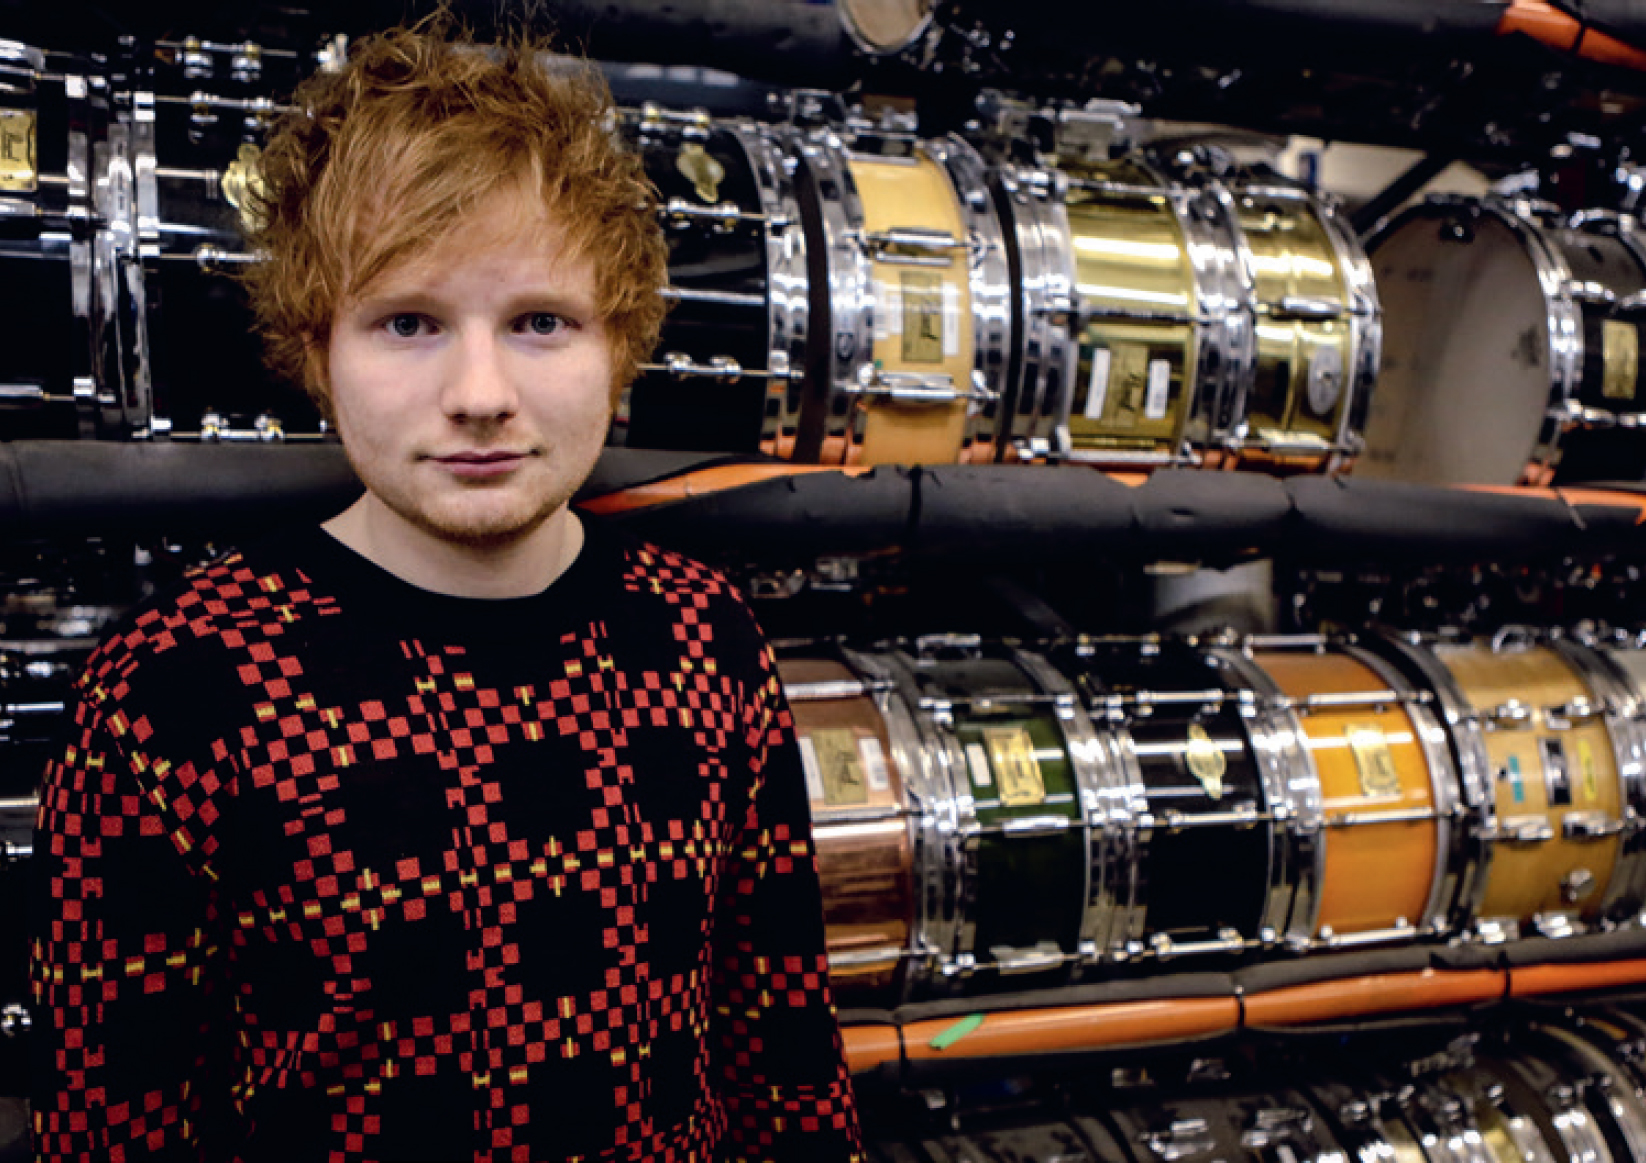 Ed Sheeran memories we made unseen photographs of my time with Ed - image 9